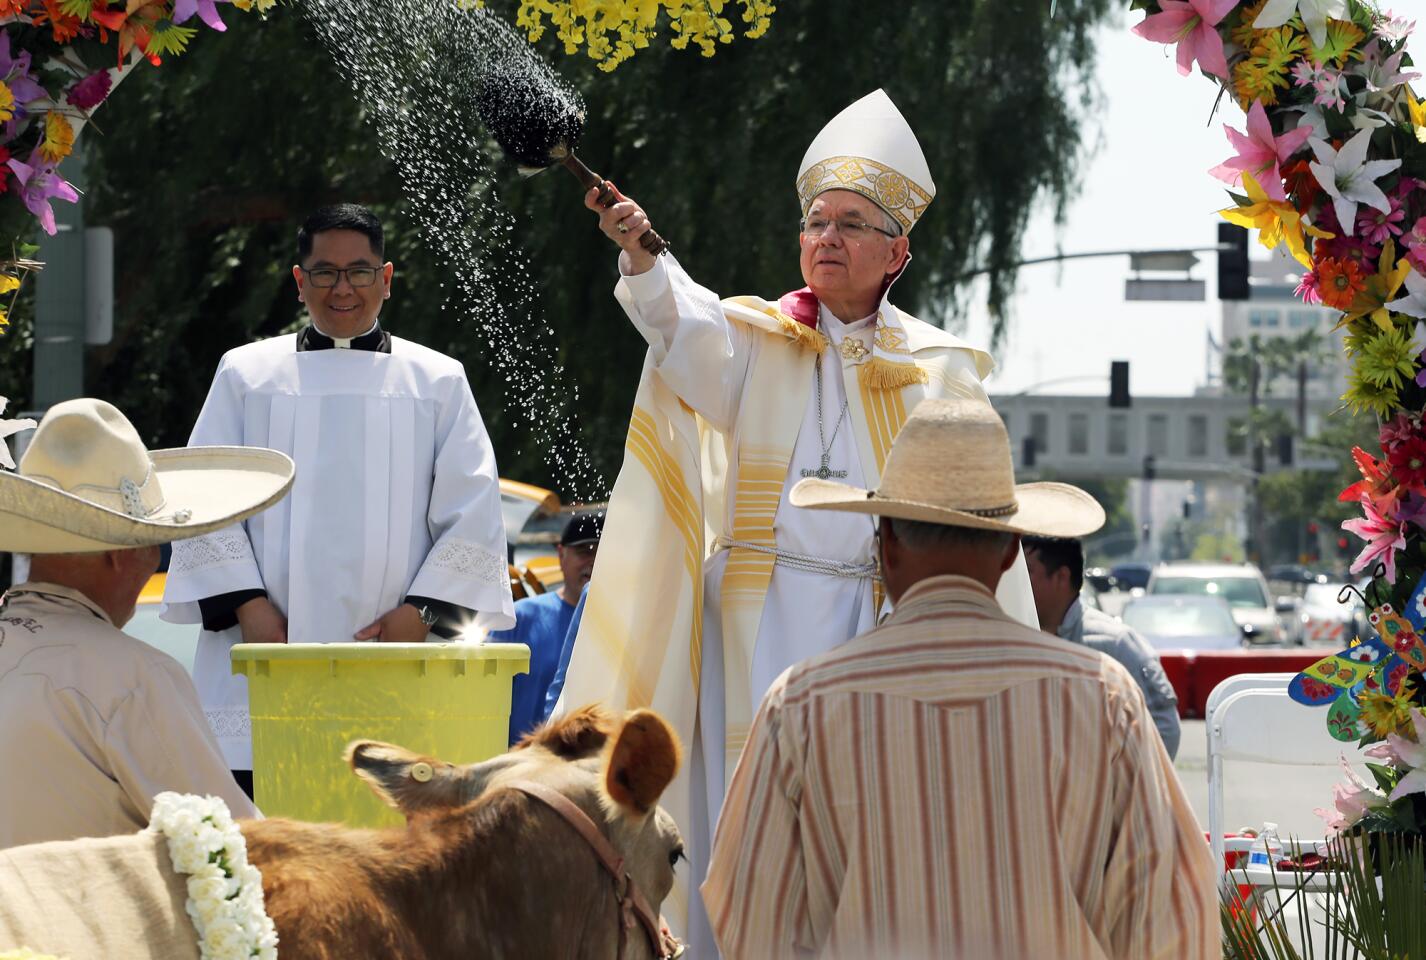 Los Angeles Archbishop Jose Gomez blesses the animals during the Blessing of the Animals at Placita Olvera